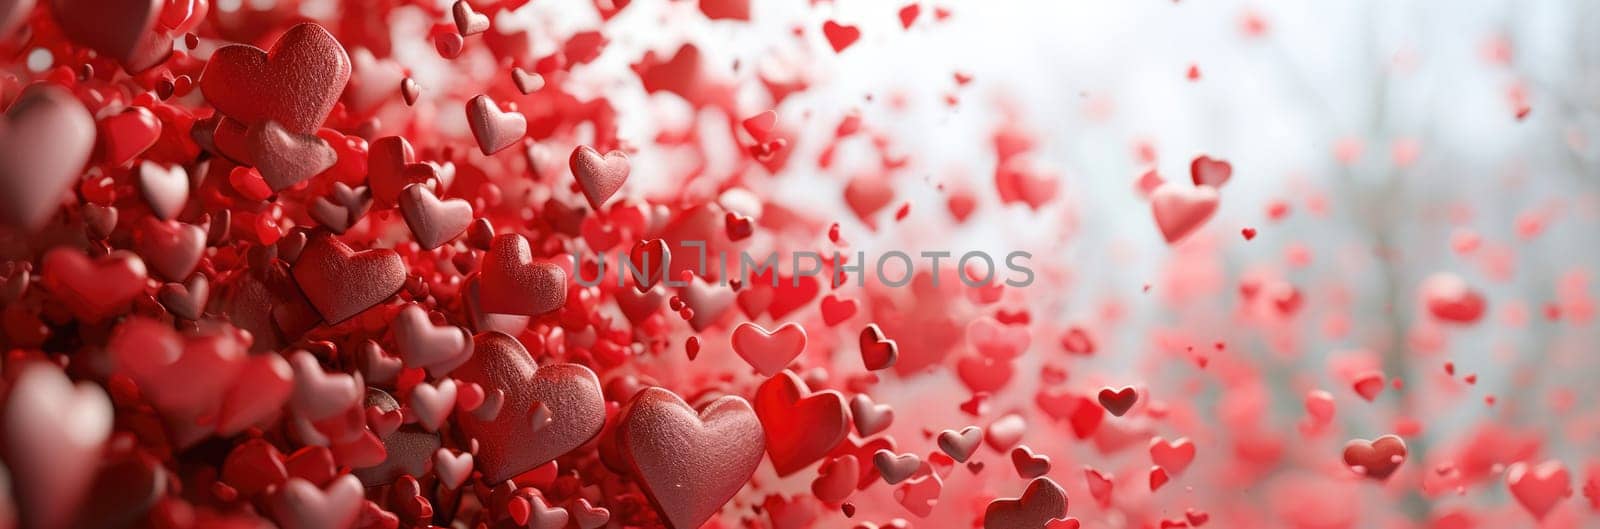 red and white valentines day background pragma by biancoblue